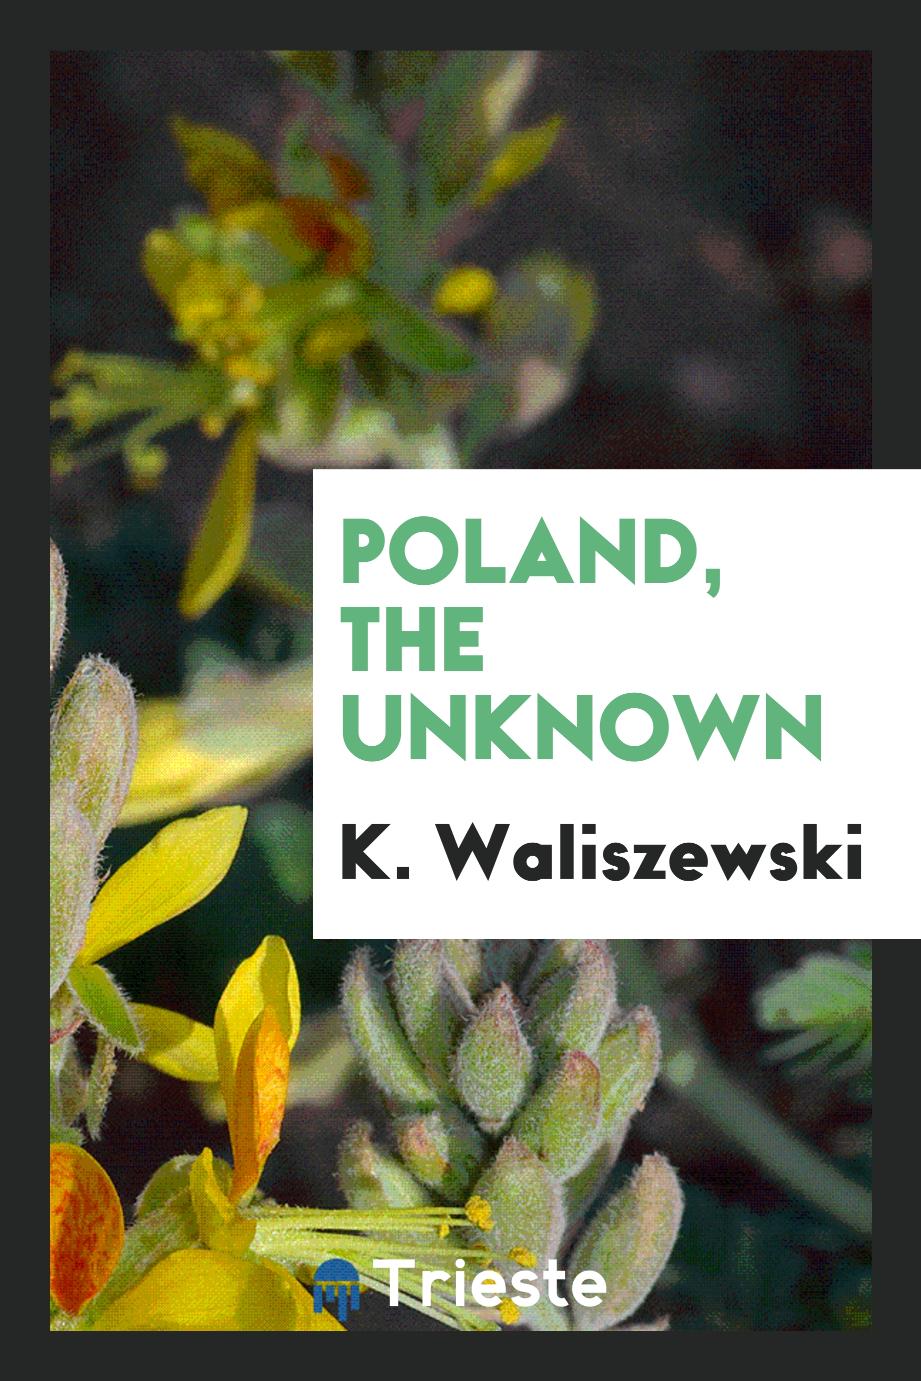 Poland, the unknown